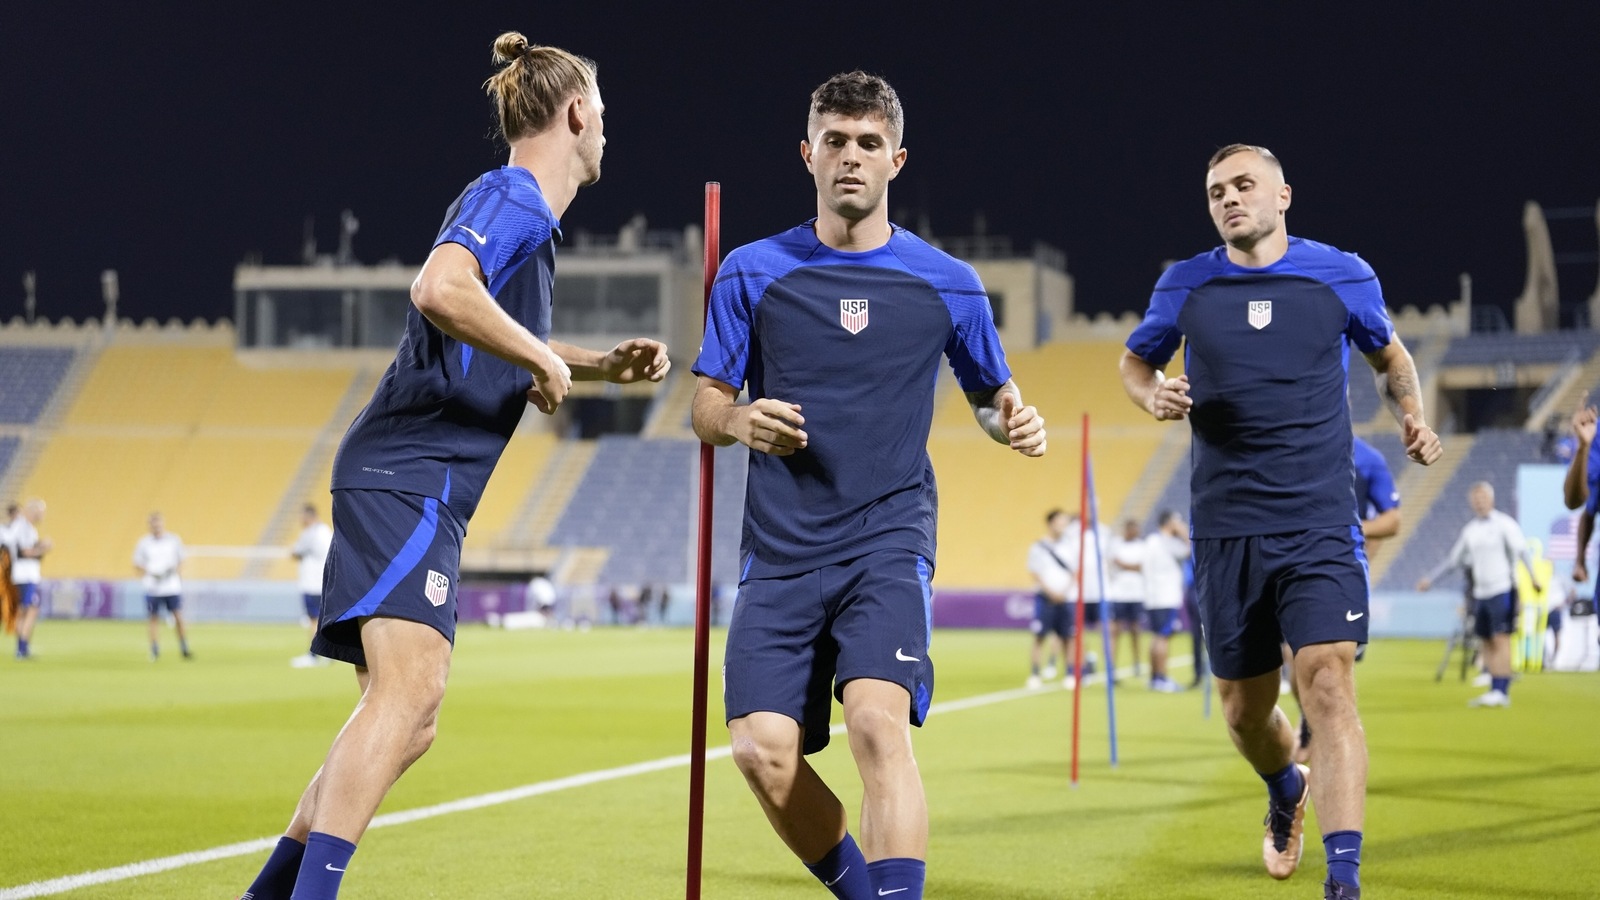 USA vs Wales Live Score FIFA World Cup 2022: Focus on Christian Pulisic as USA take on Gareth Bale-led WAL in opener